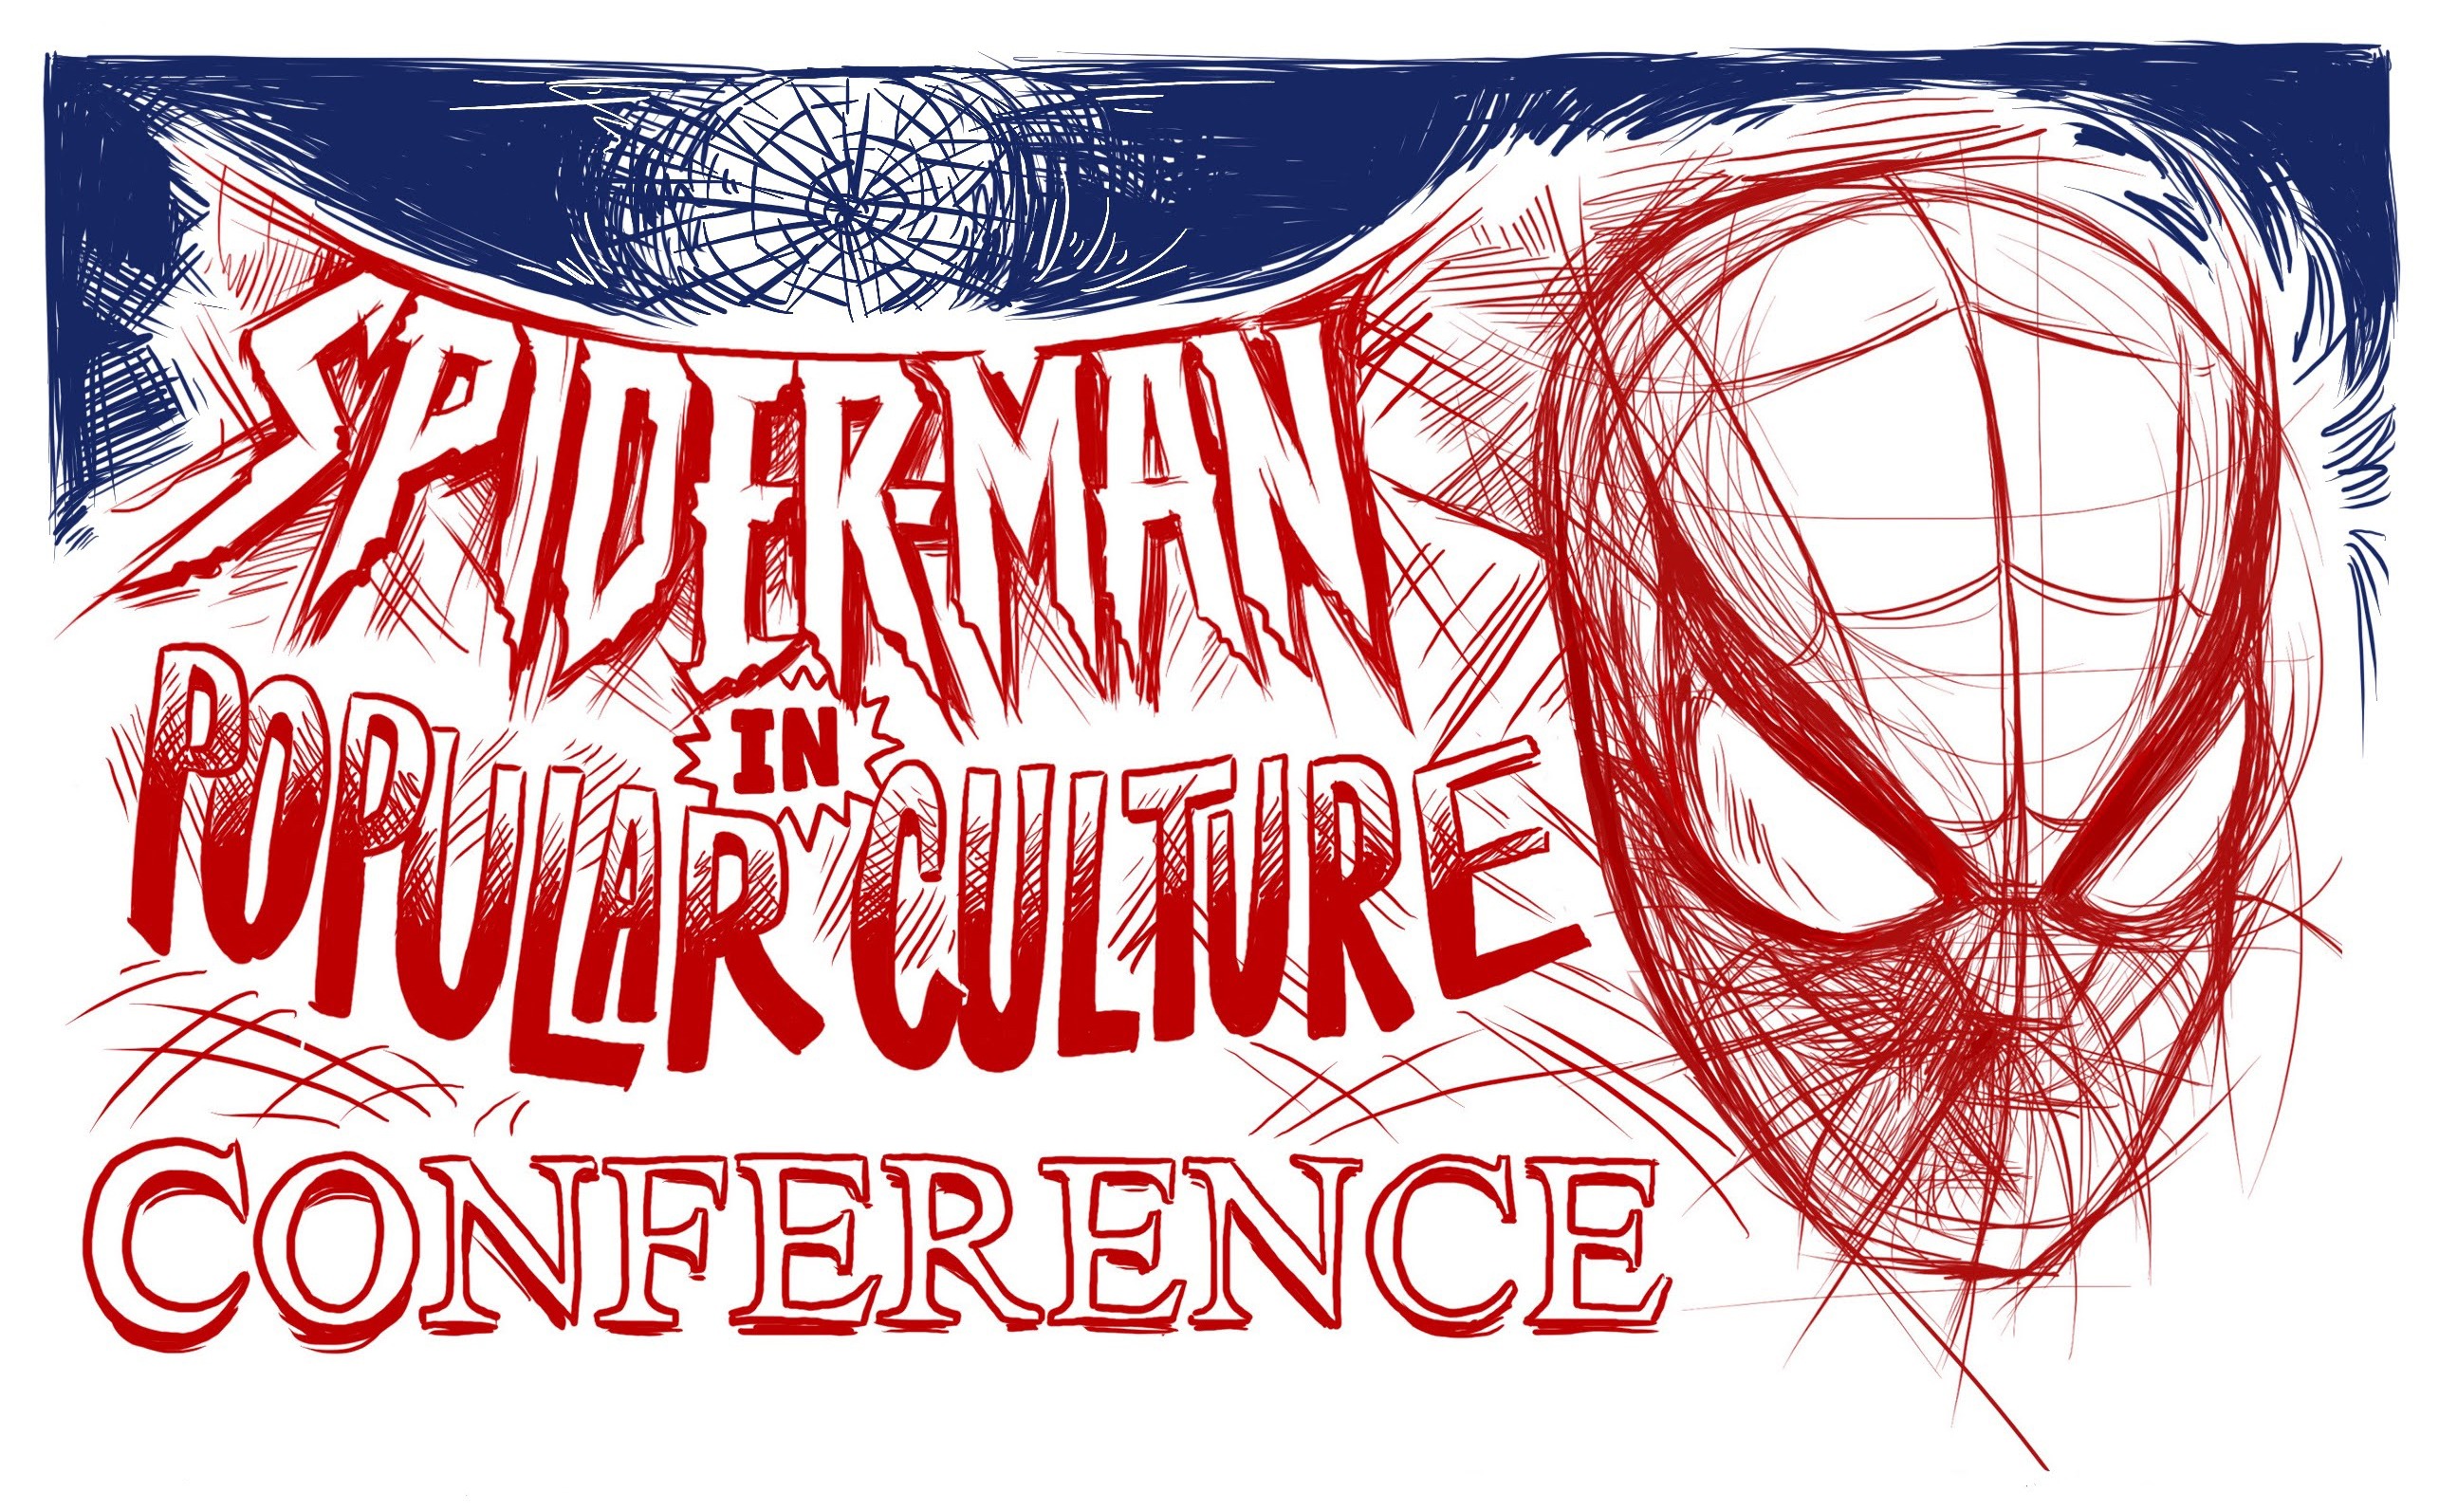 Spider-Man in Popular Culture Conference